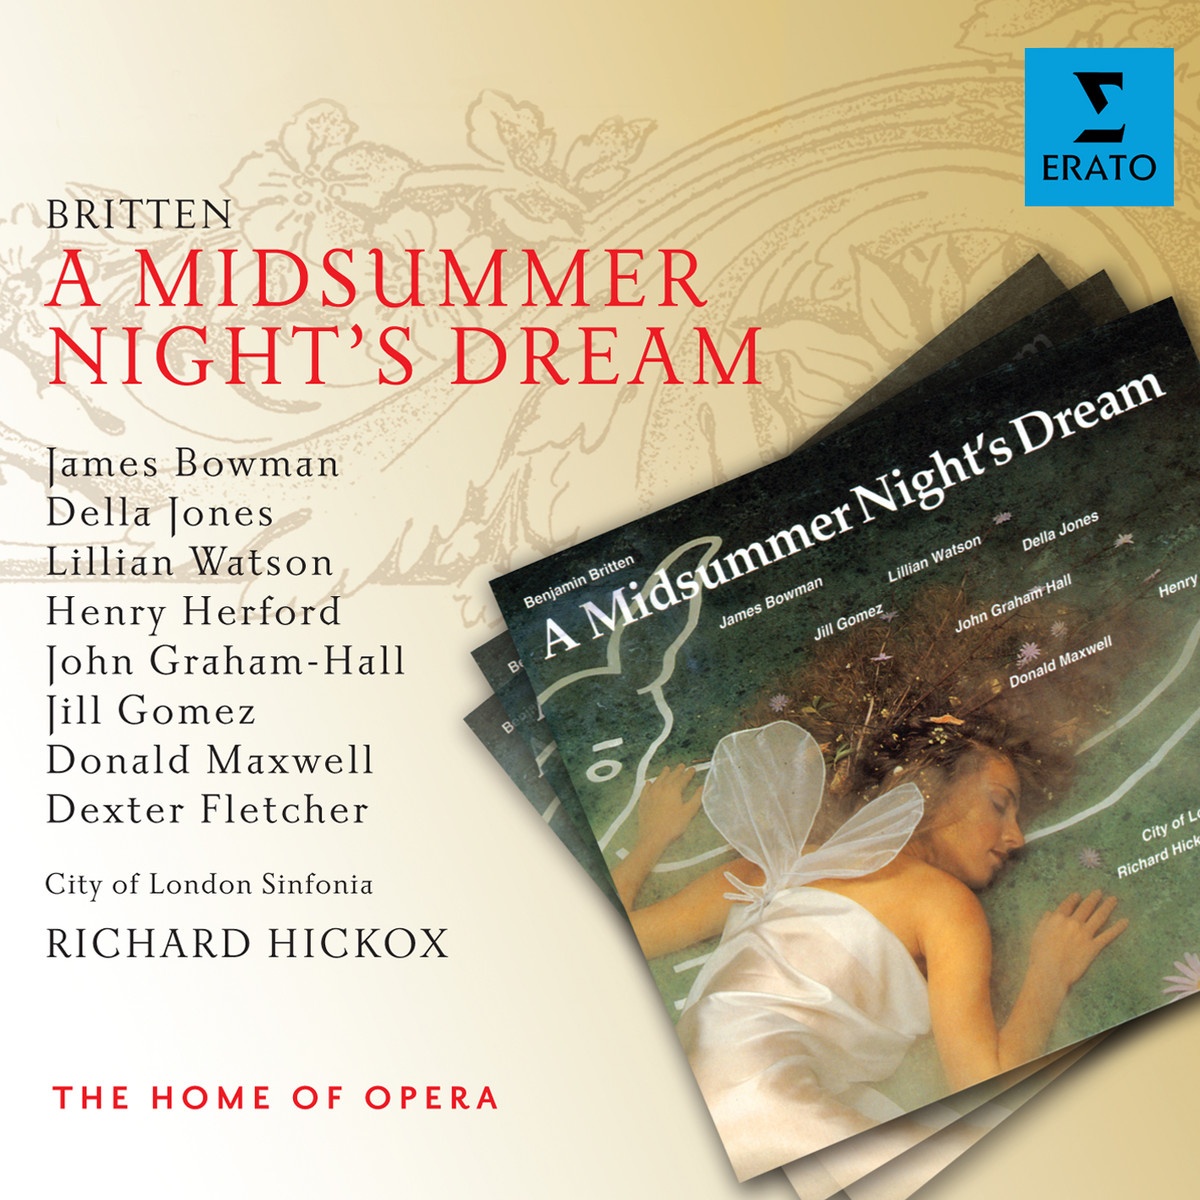 A Midsummer Night's Dream Op. 64, ACT ONE, Introduction: Over hill, over dale (Fairies/Puck)